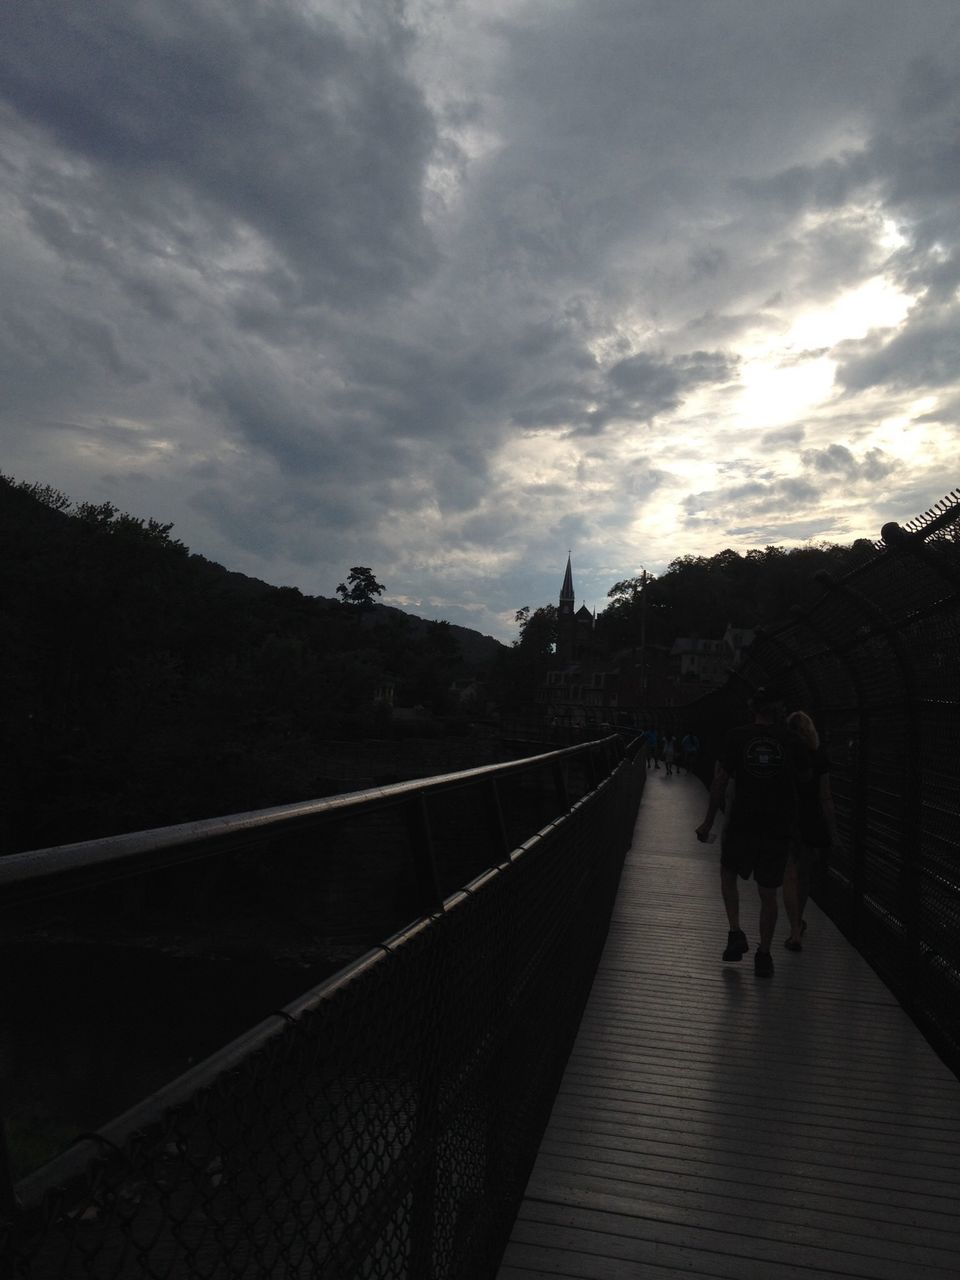 walking, sky, the way forward, lifestyles, men, leisure activity, person, full length, railing, built structure, diminishing perspective, architecture, cloud - sky, vanishing point, rear view, connection, tree, sunset